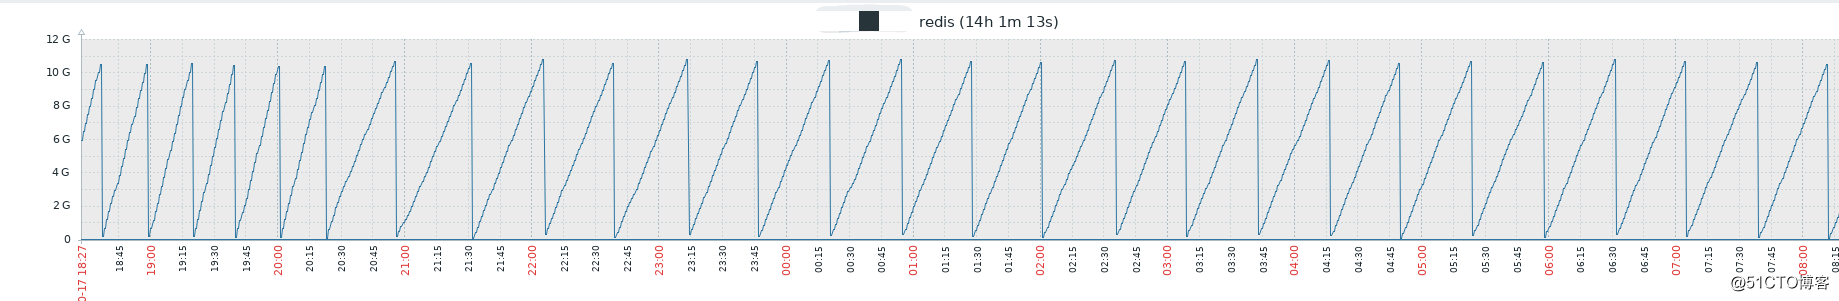 redis inexplicable data record is cleared troubleshooting